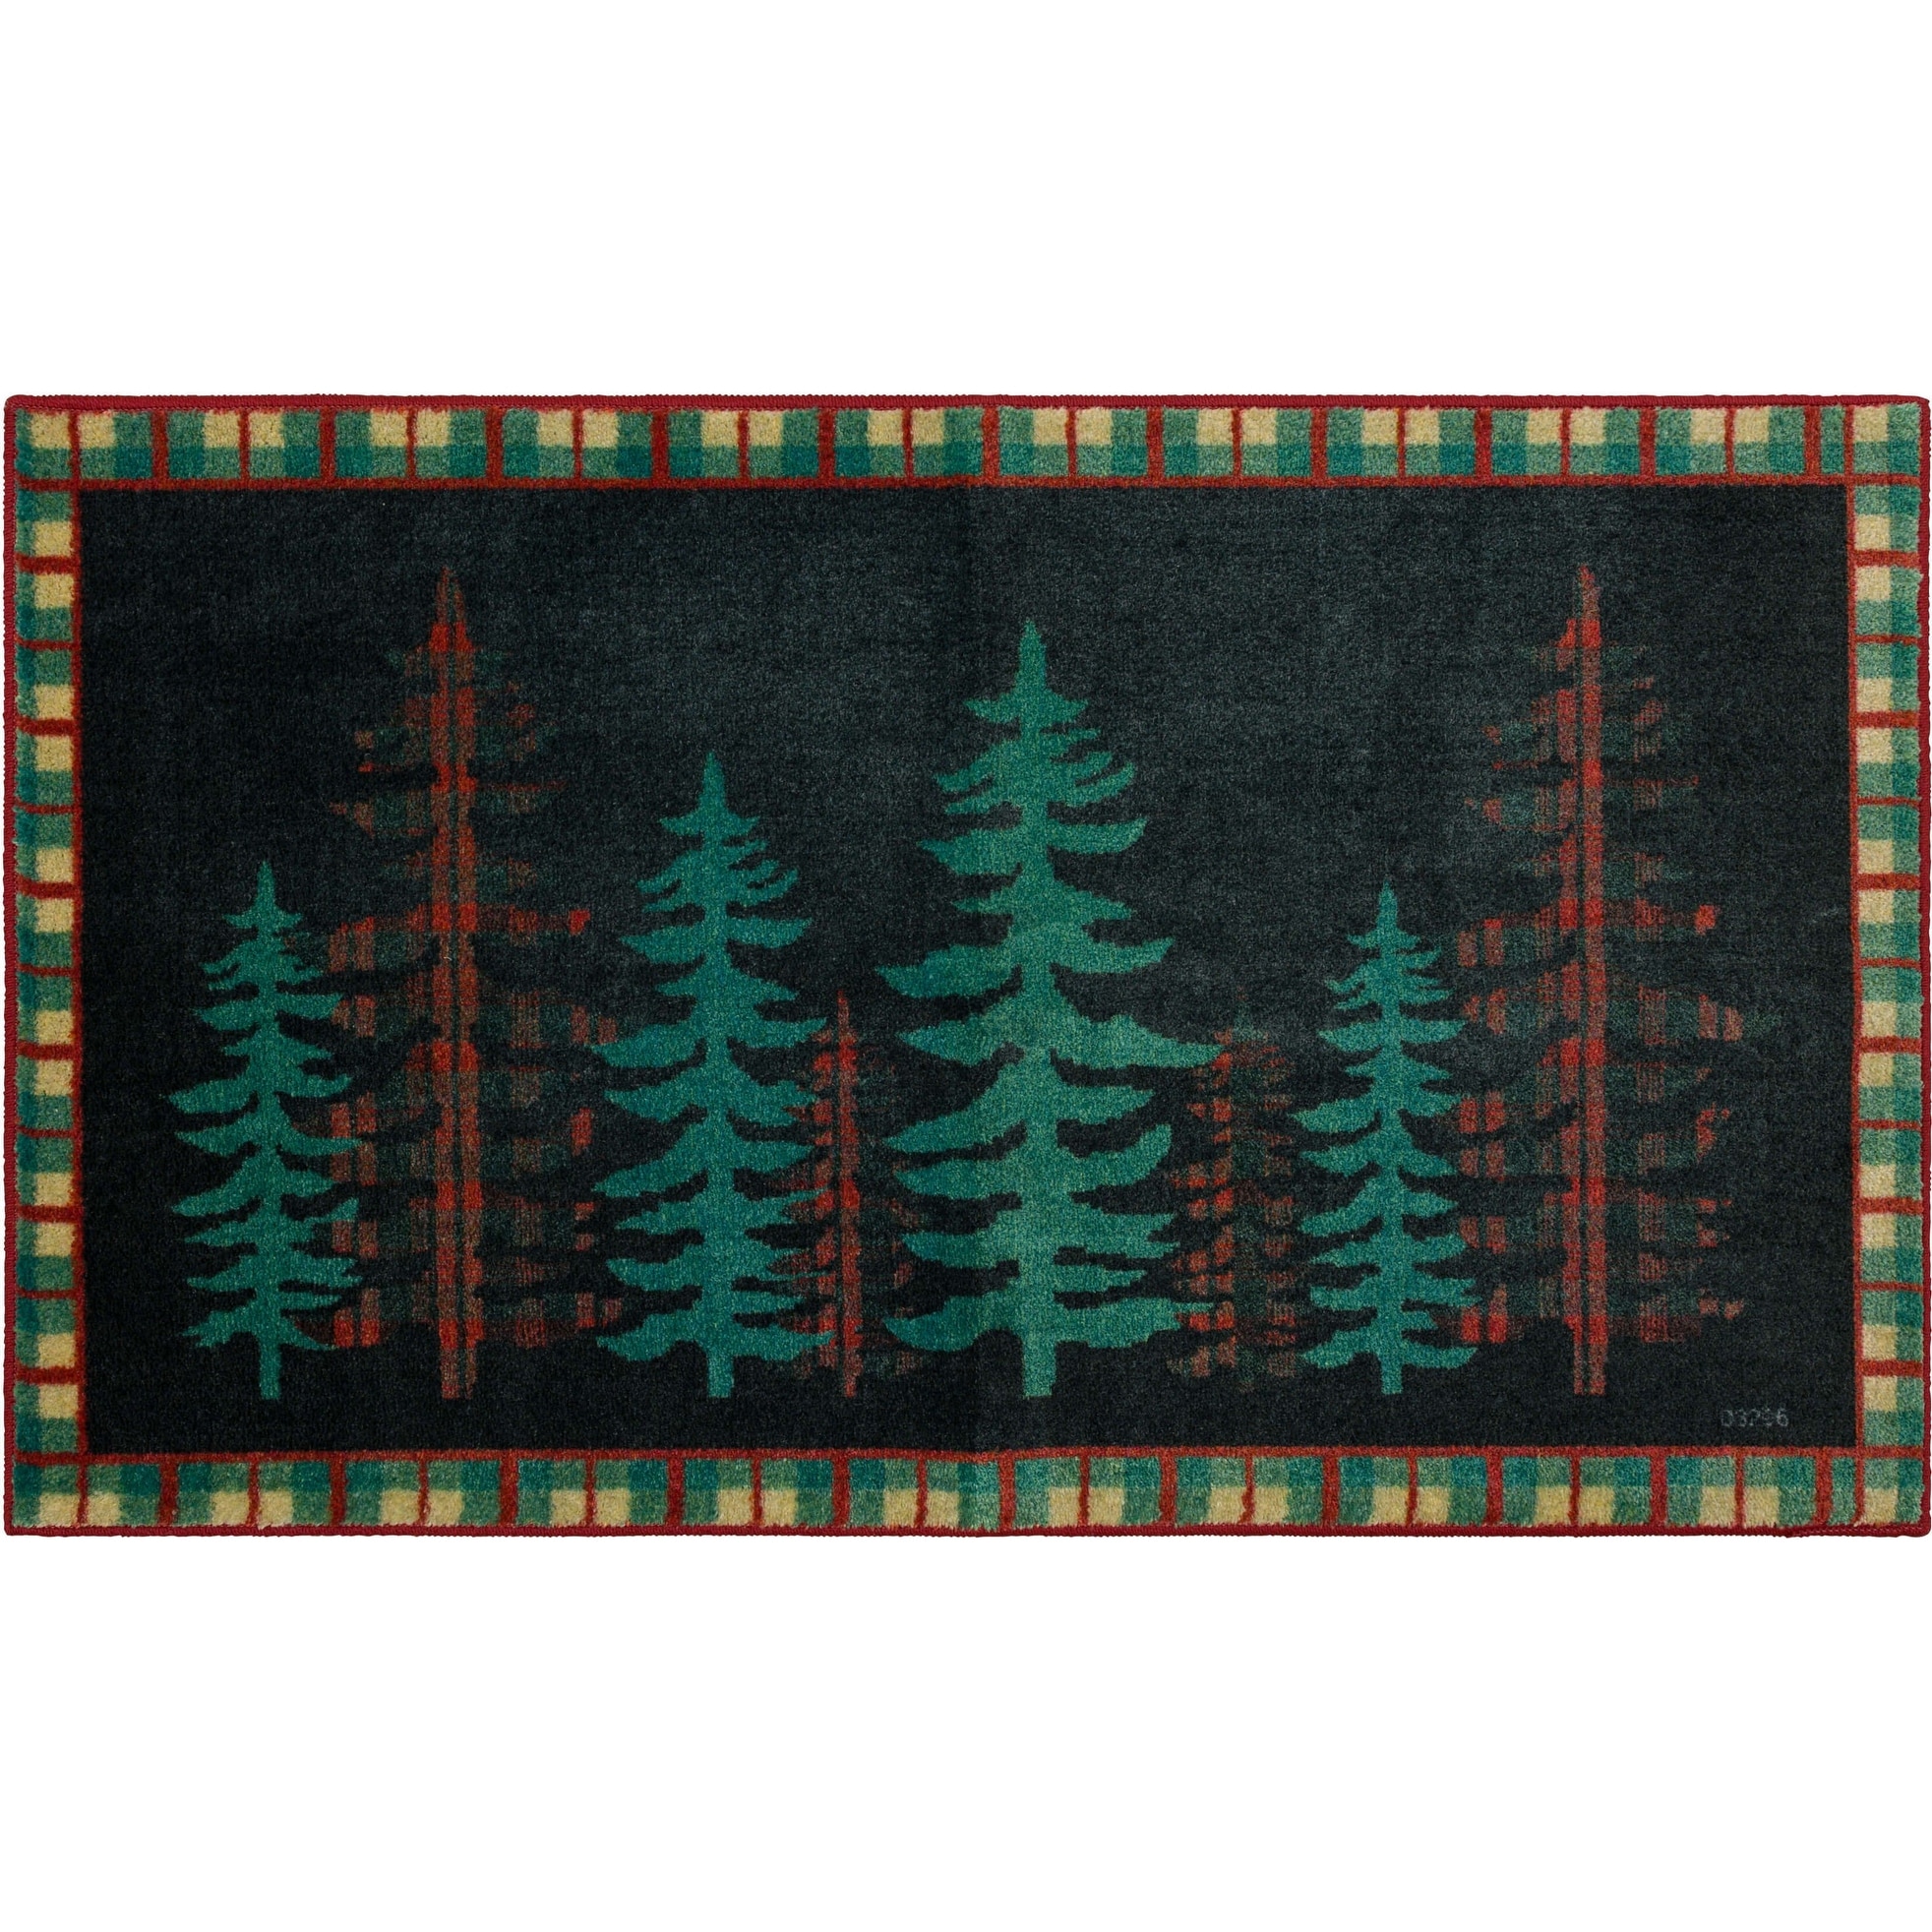 https://ak1.ostkcdn.com/images/products/is/images/direct/51e55e10dfb824acf28a565848f506e853bb2ce7/Mohawk-Home-Plaid-Forest-Green-Area-Rug.jpg